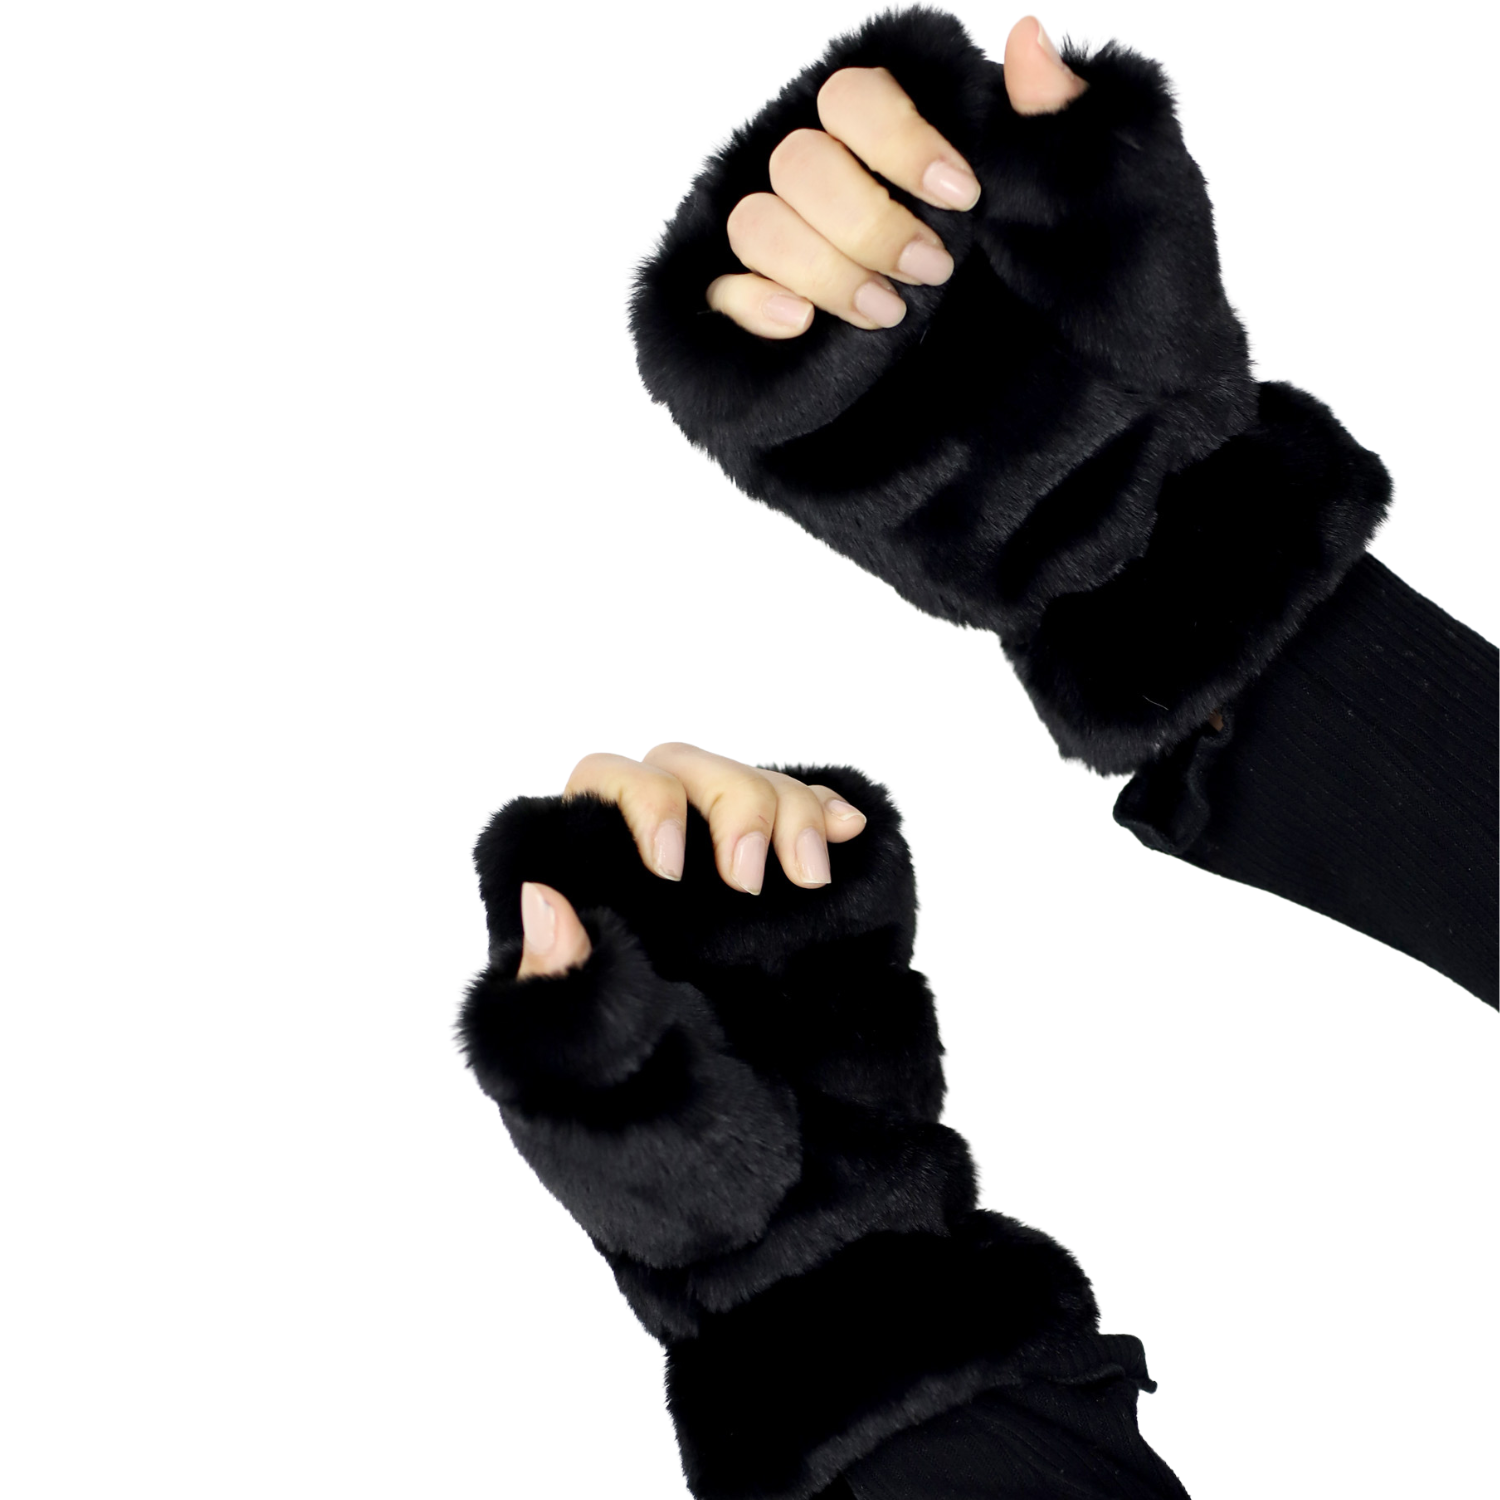 Talon Fingerless Leather Gloves — The Final Touch Company